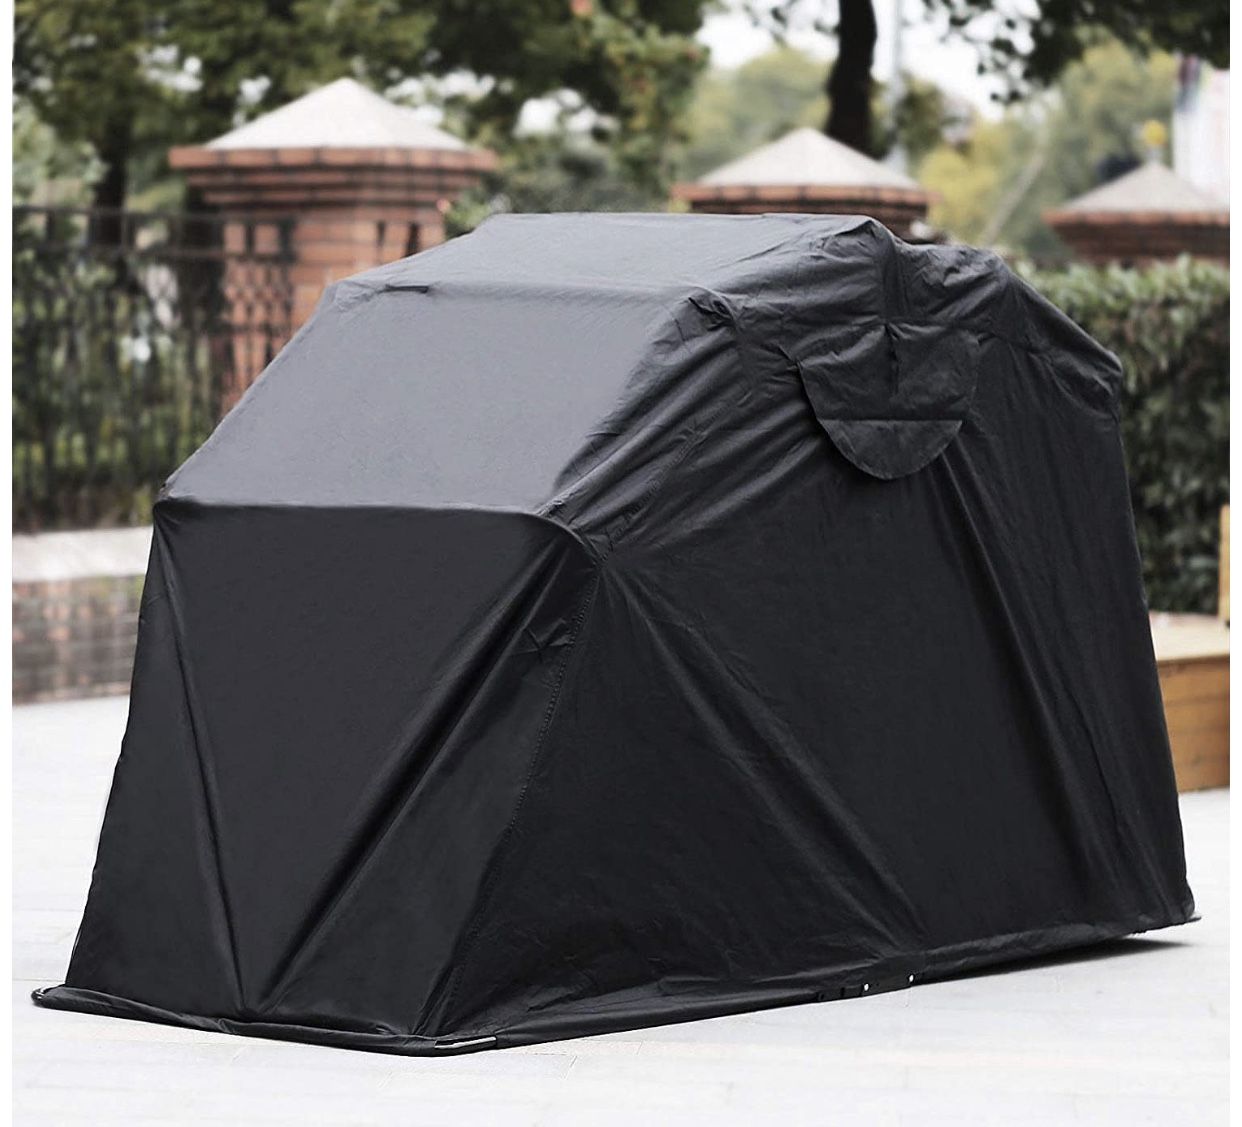 Motorcycle Shelter Shed Strong Frame Motorbike Garage Waterproof 106.5 Inch X41.5 Inch X61 Inch Motorbike Cover Tent Scooter Shelter Hoods for Vehicl